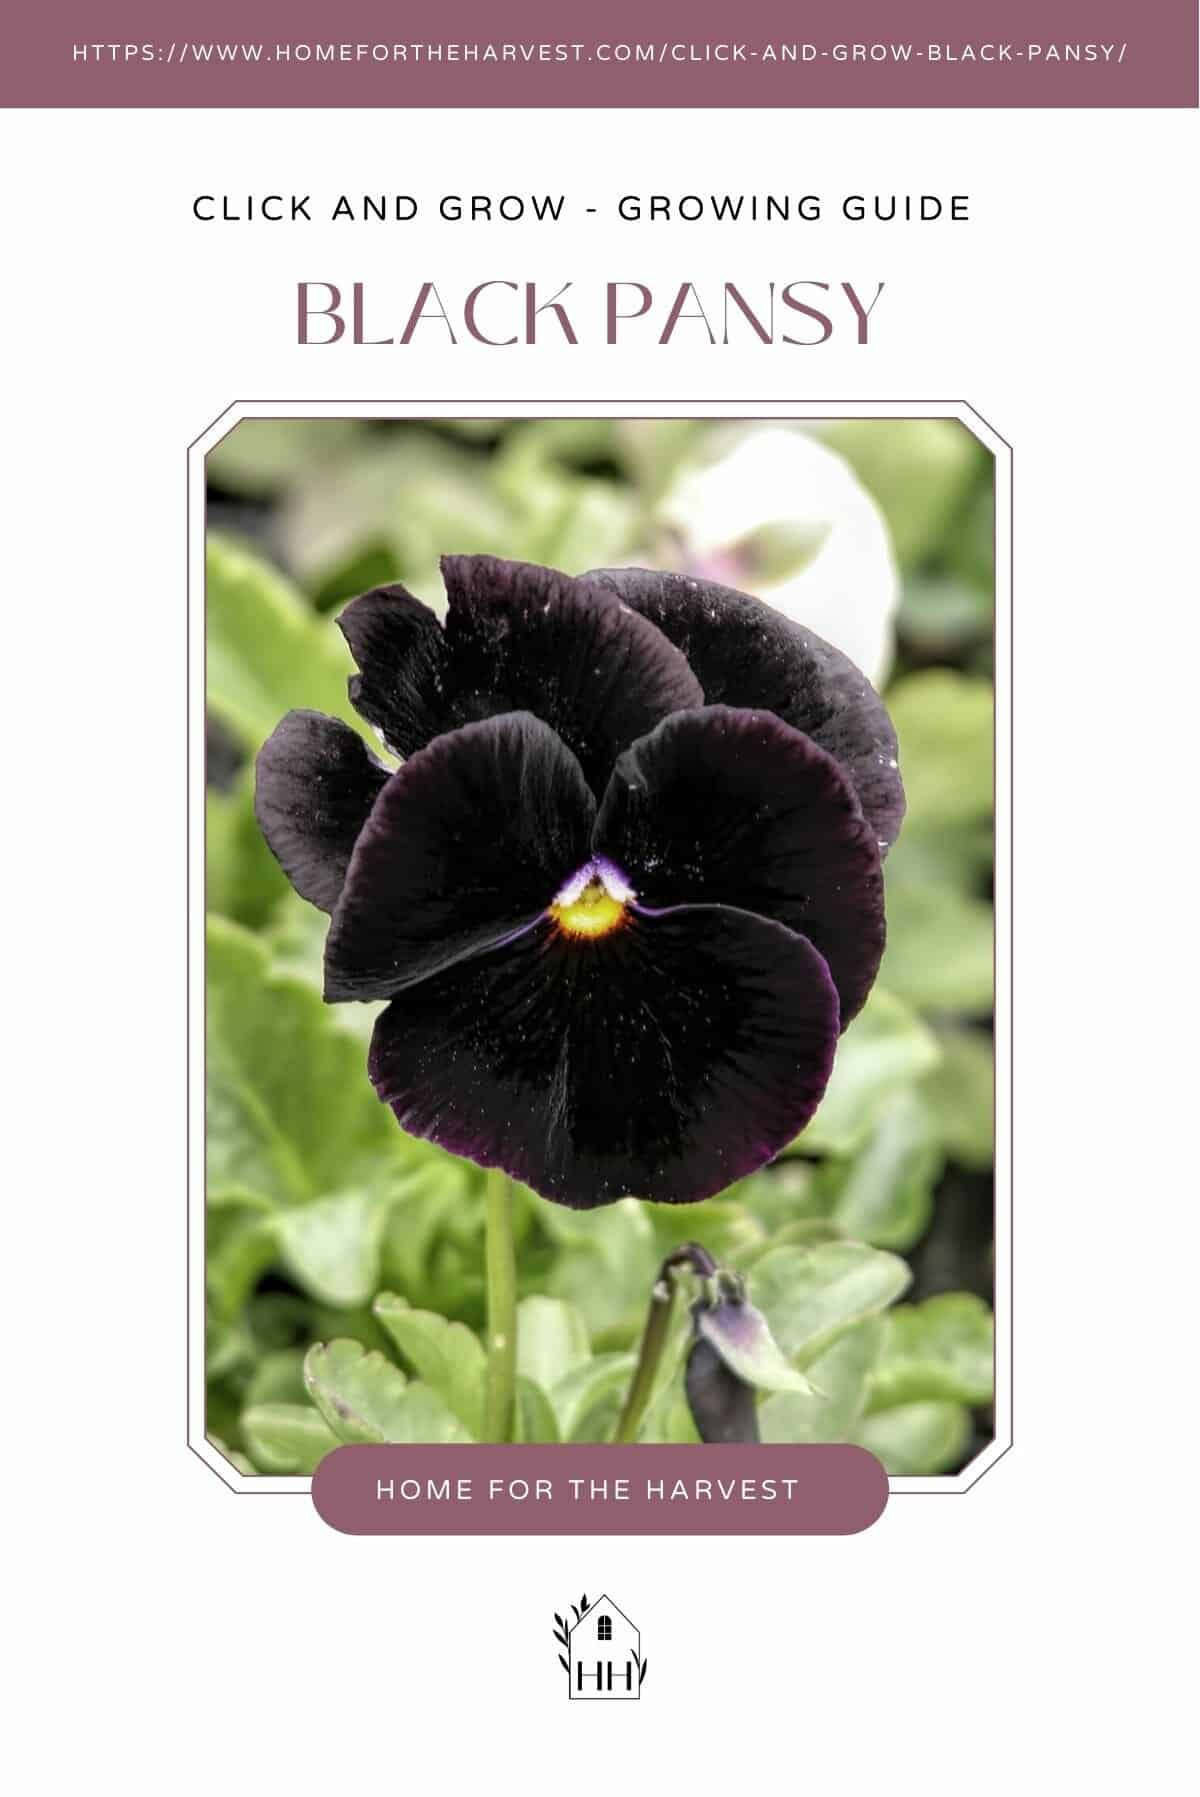 Click and grow - black pansy growing guide - pinterest via @home4theharvest